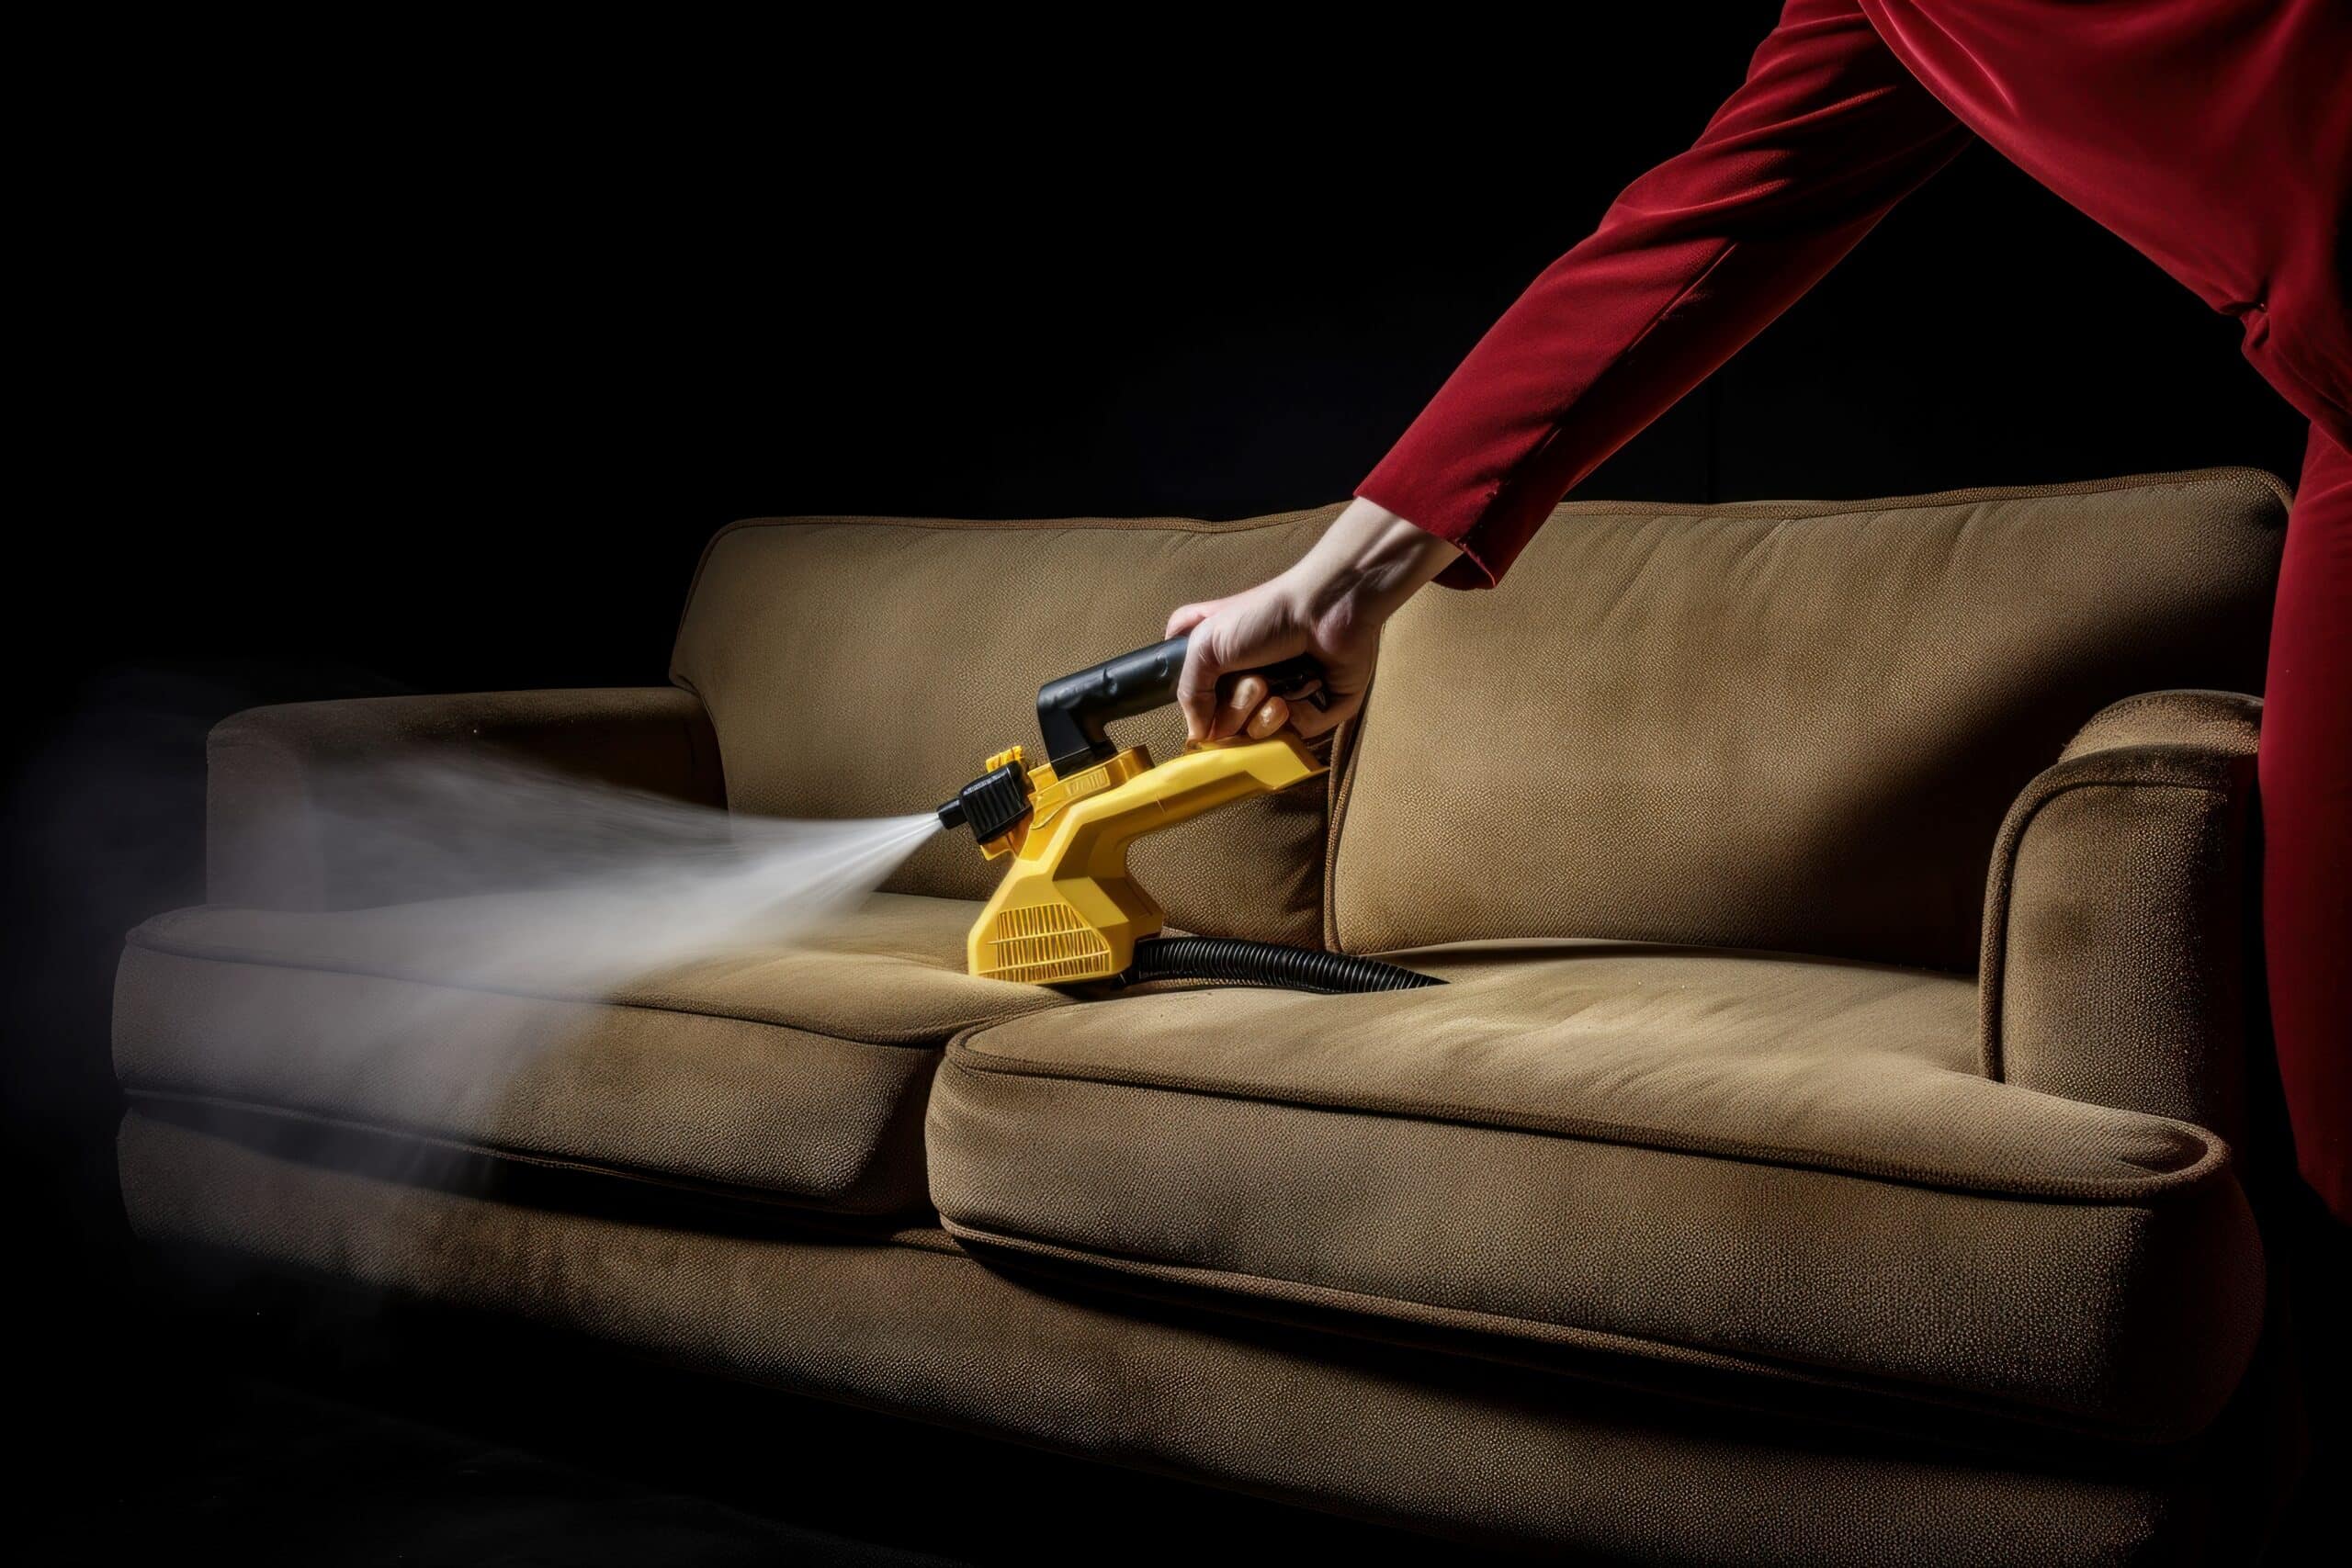 www.appr.com : Are there any limitations to what a steam cleaner can clean on upholstery and carpet?